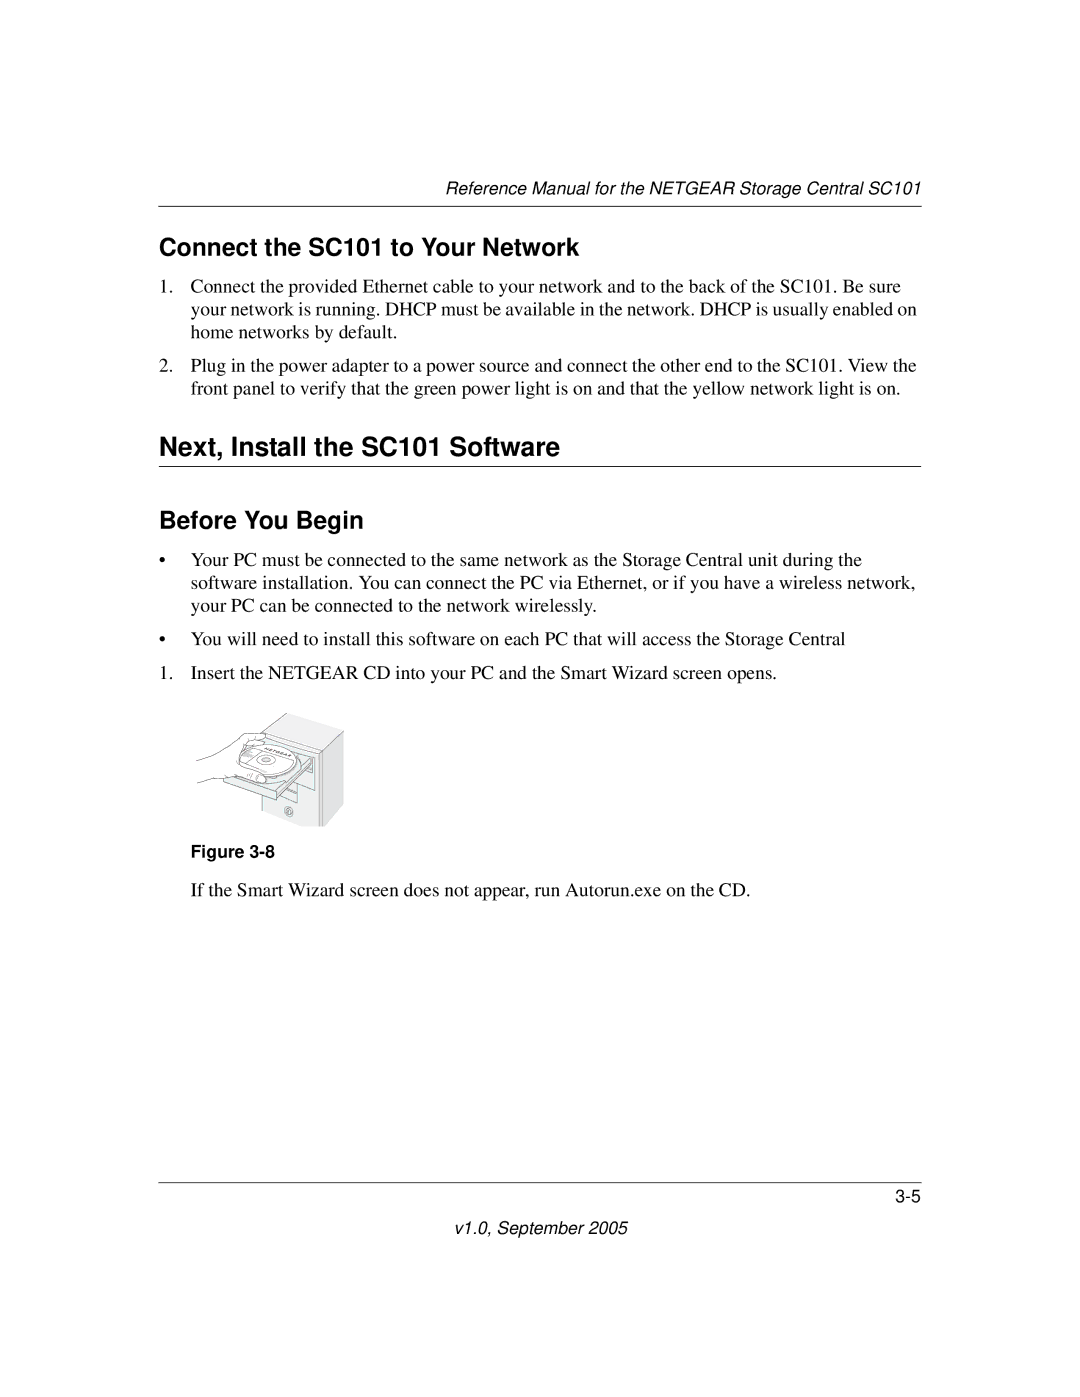 NETGEAR manual Next, Install the SC101 Software, Connect the SC101 to Your Network, Before You Begin 